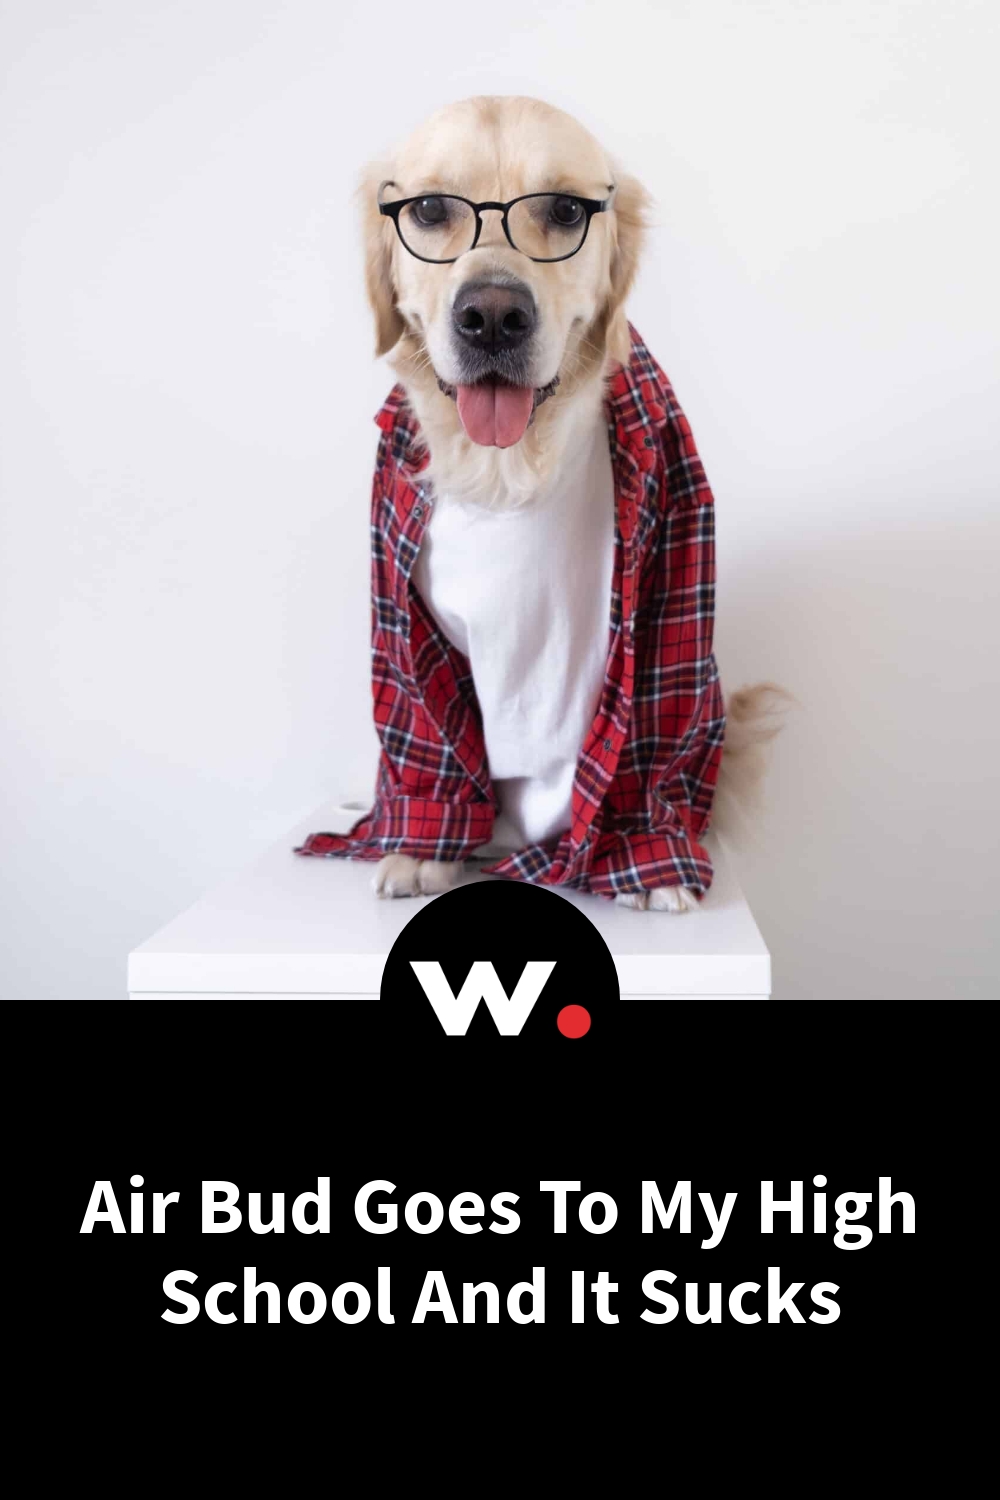 Air Bud Goes To My High School And It Sucks